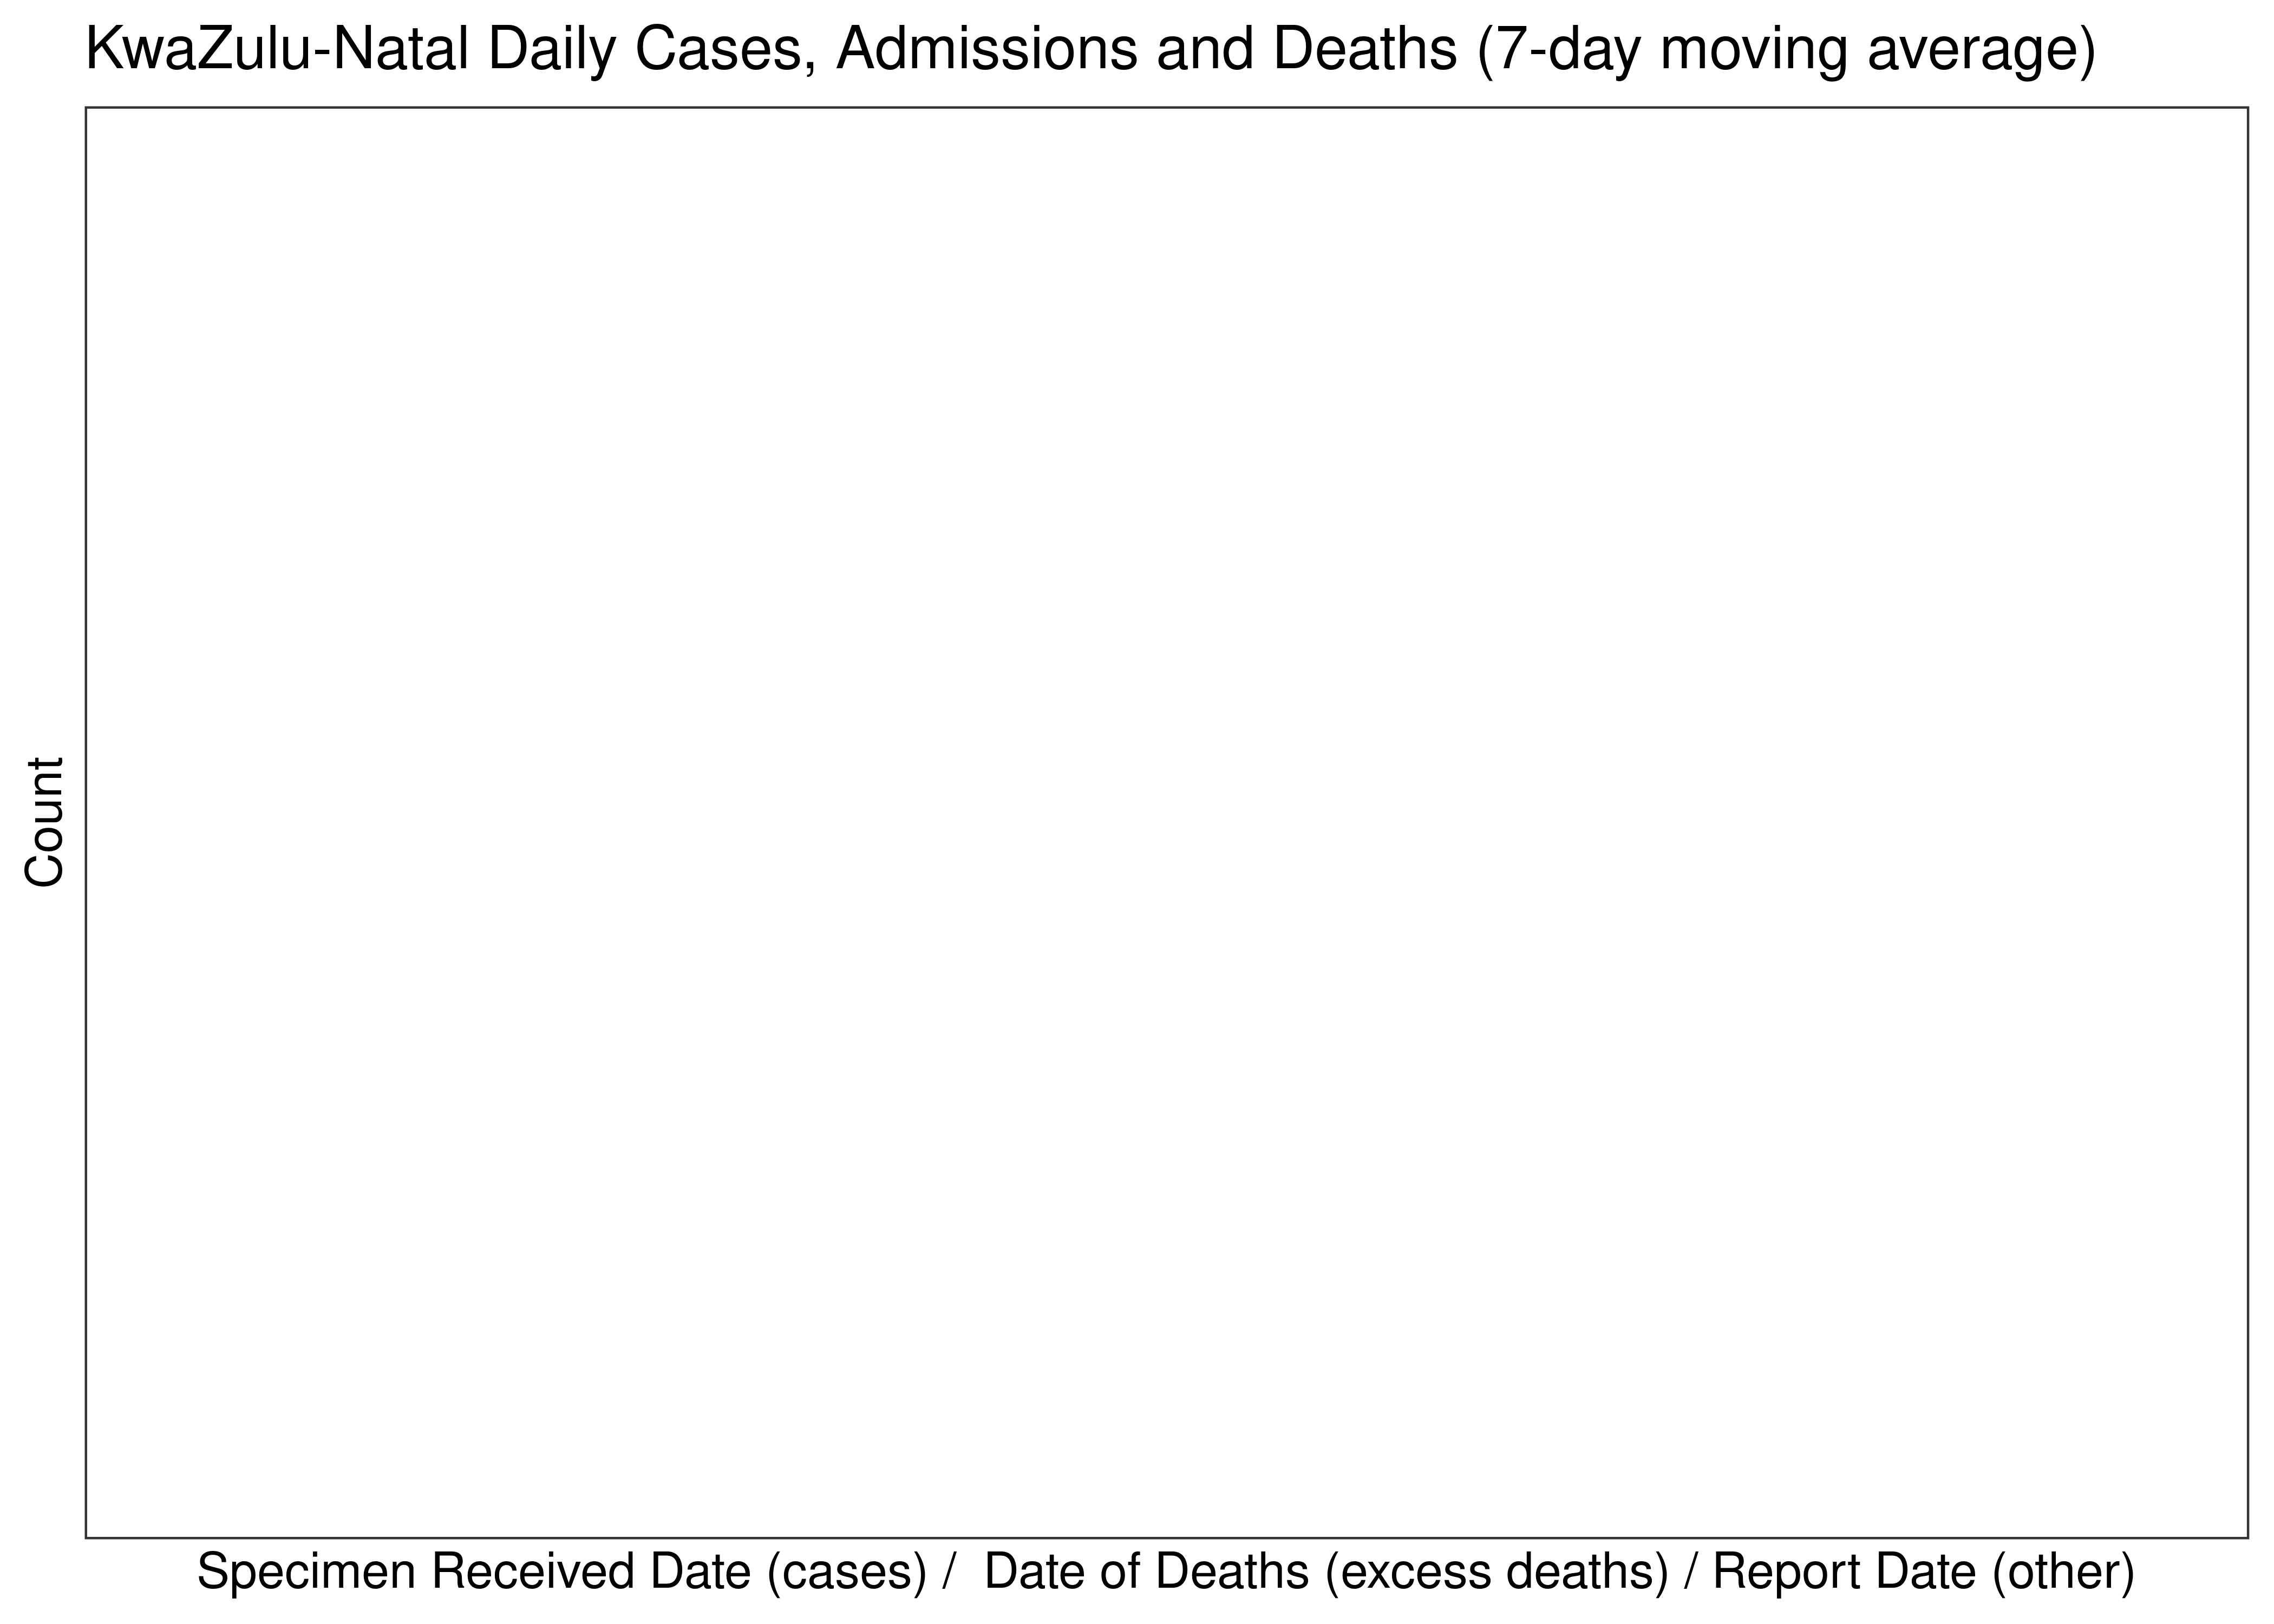 KwaZulu-Natal Daily Cases, Admissions and Deaths for Last 30-days (7-day moving average)